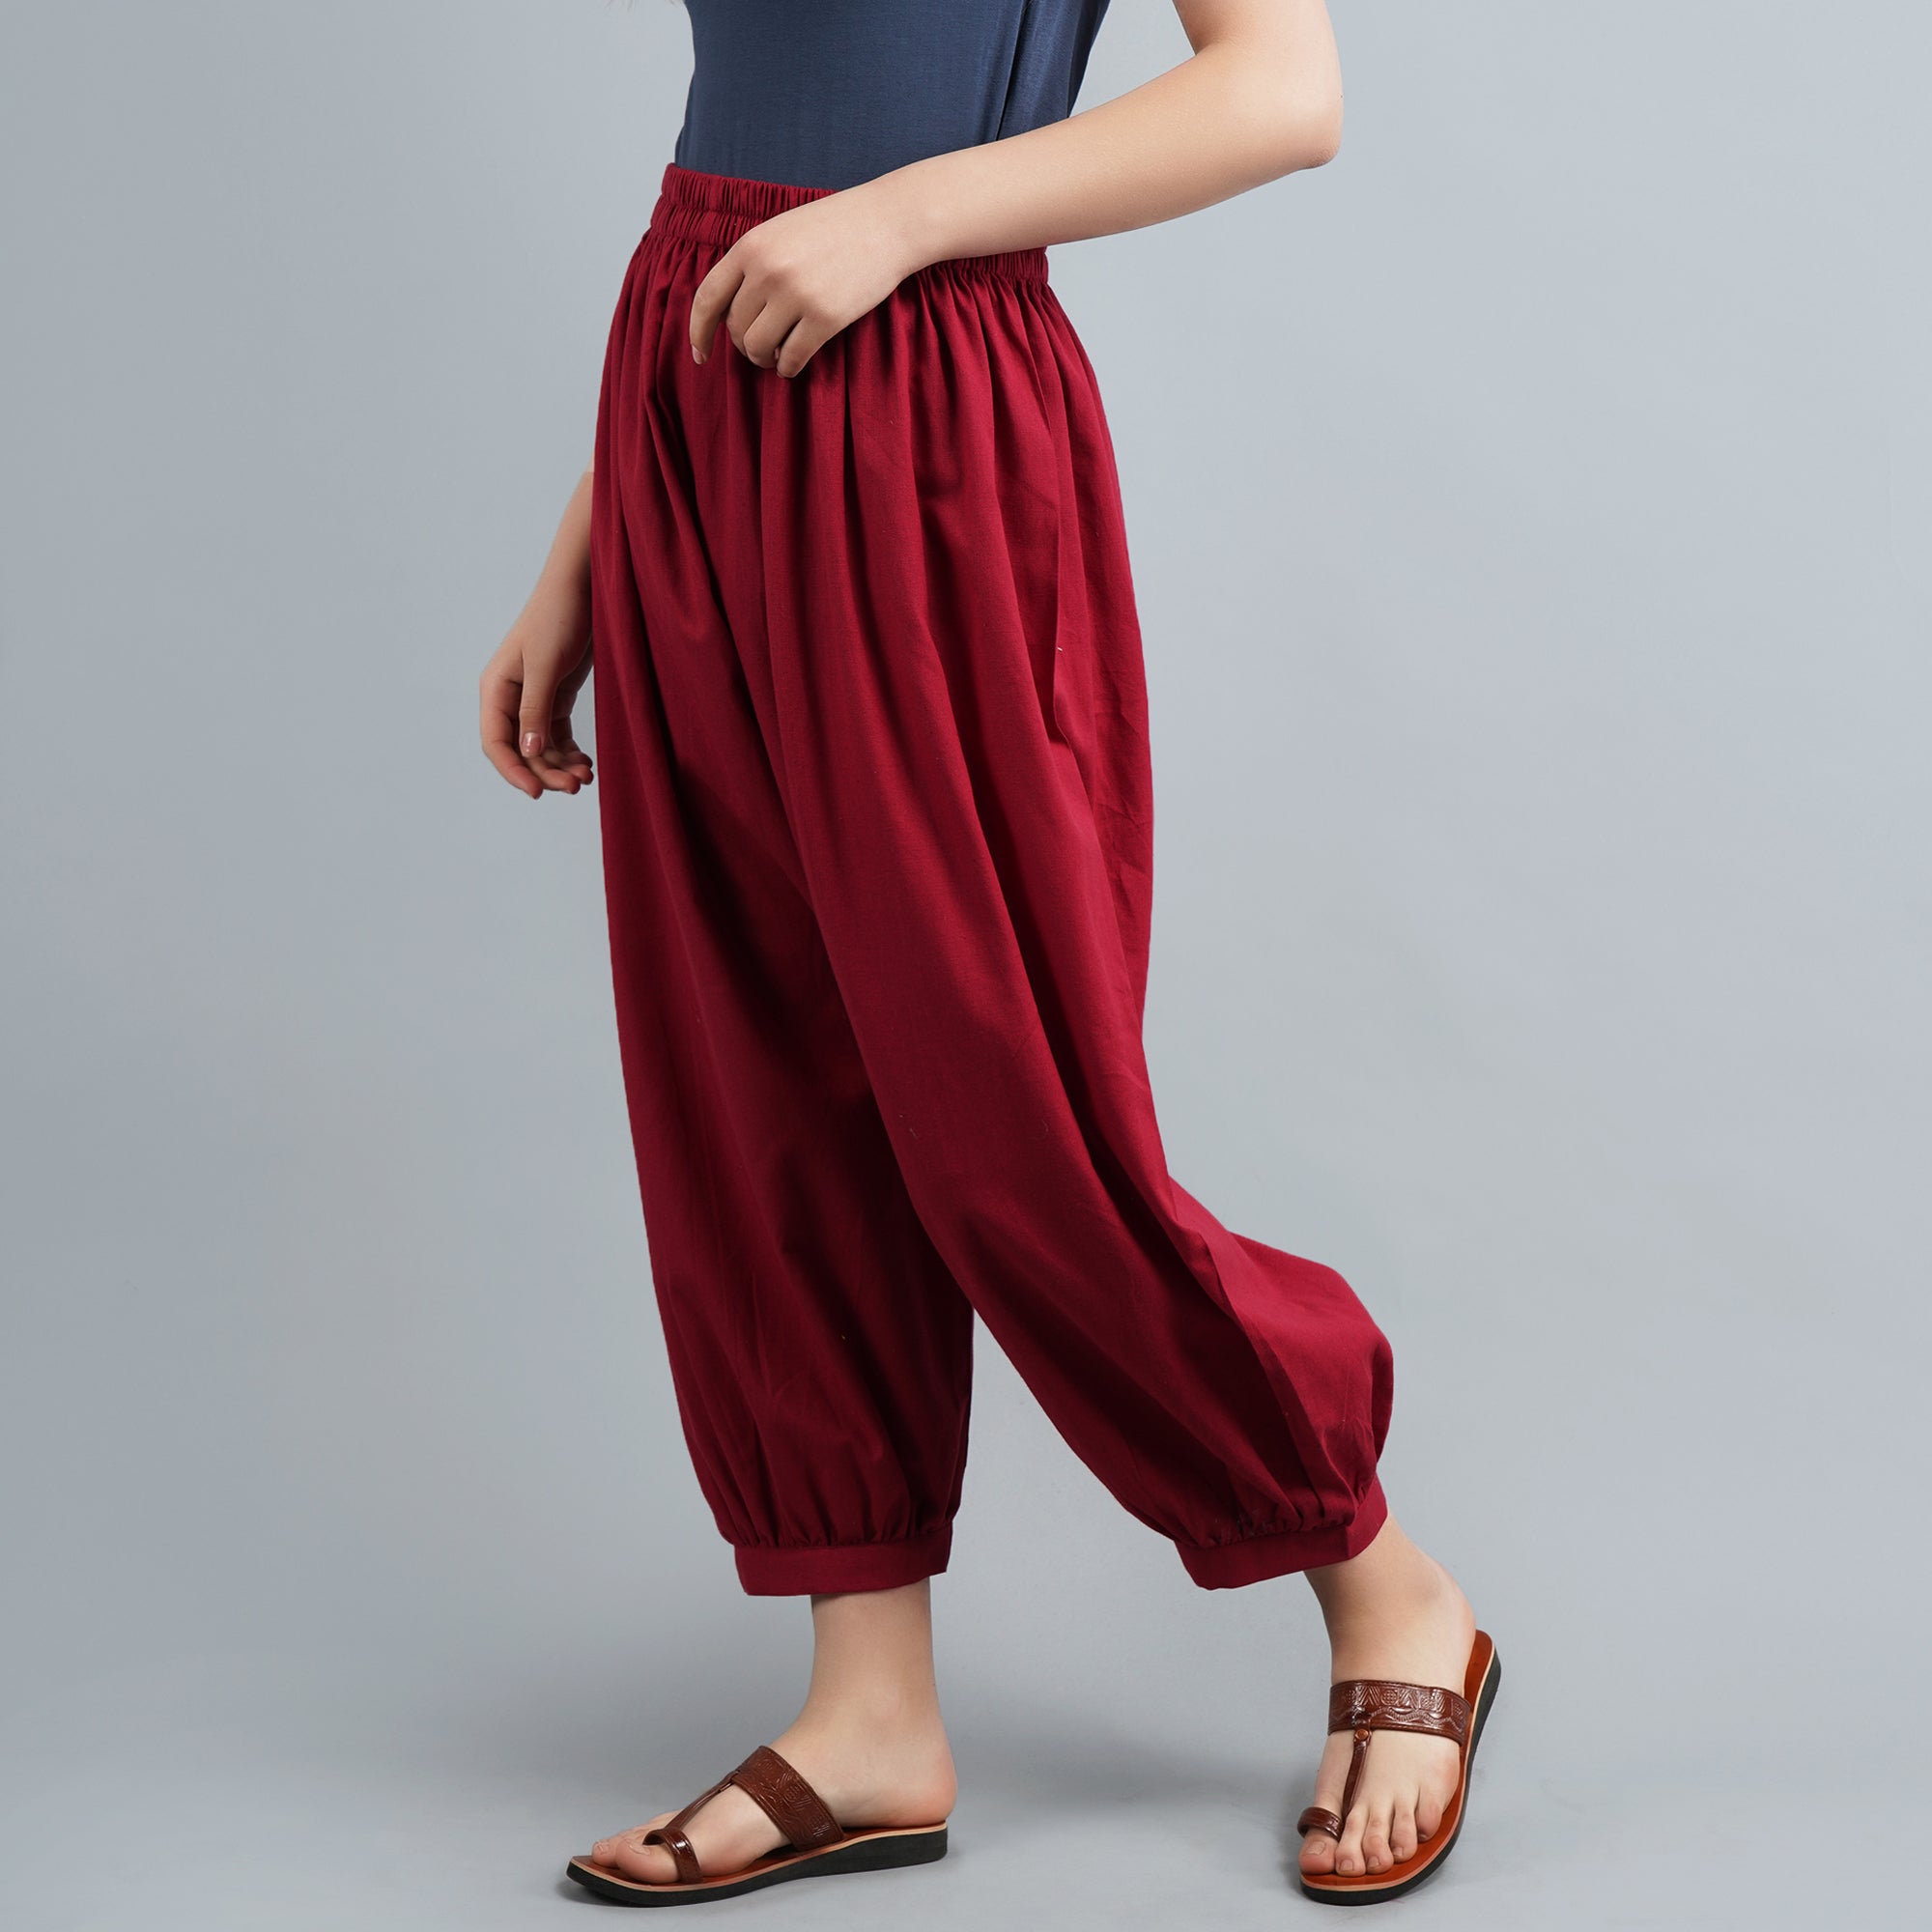 Mrat Sweat Pants Women Casual Full Length Pants Fashion Ladies Summer  Casual Loose Cotton And Linen Pocket Solid Trousers Pants Pants For Female  Graphic Light Blue XXL - Walmart.com